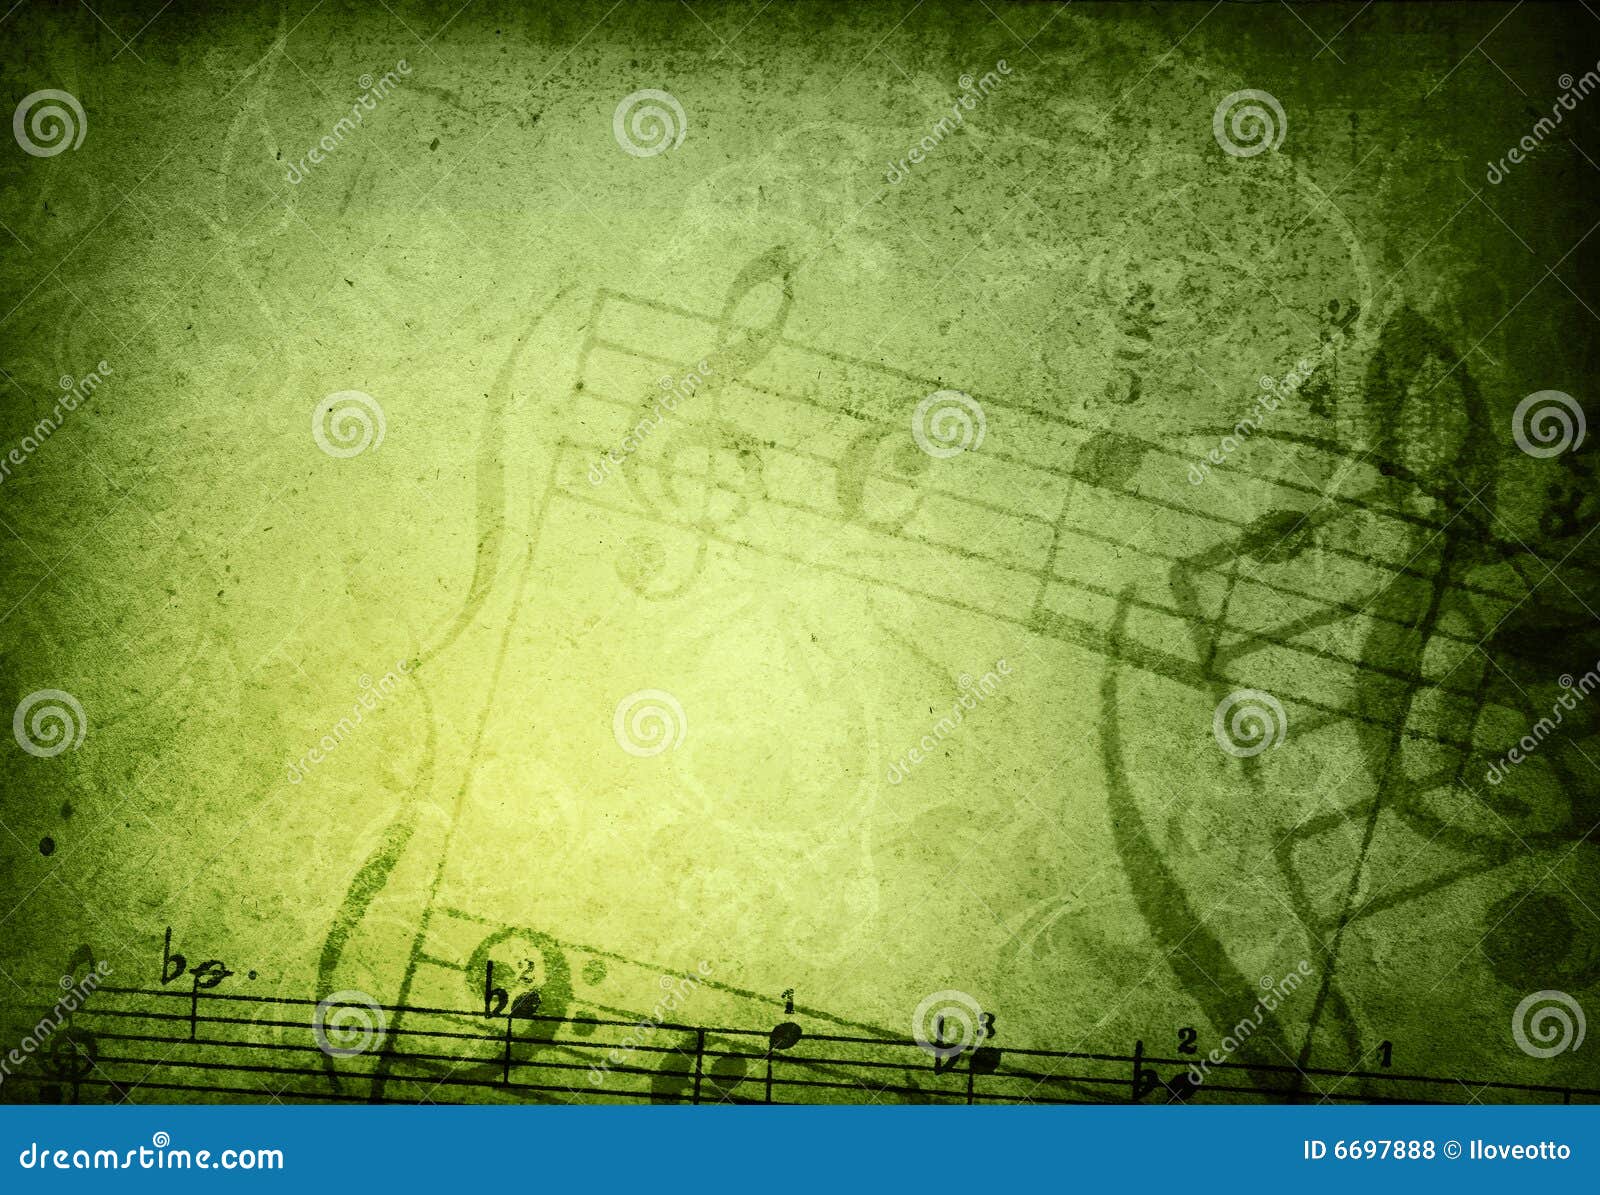 grunge melody textures and backgrounds